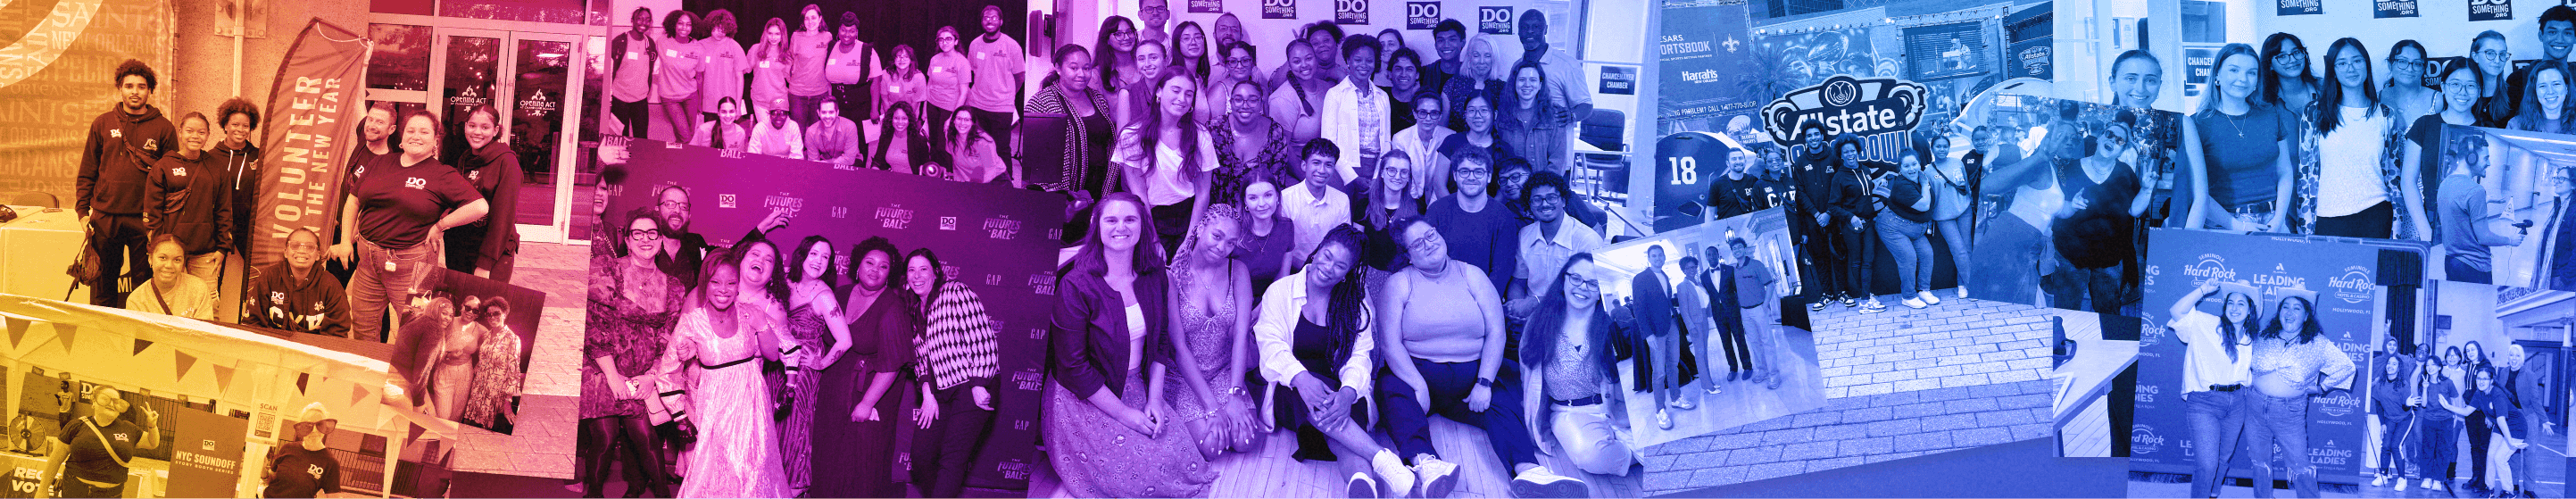 A colorful collage of the DoSomething team engaging with, and fueling young people to change the world for the better